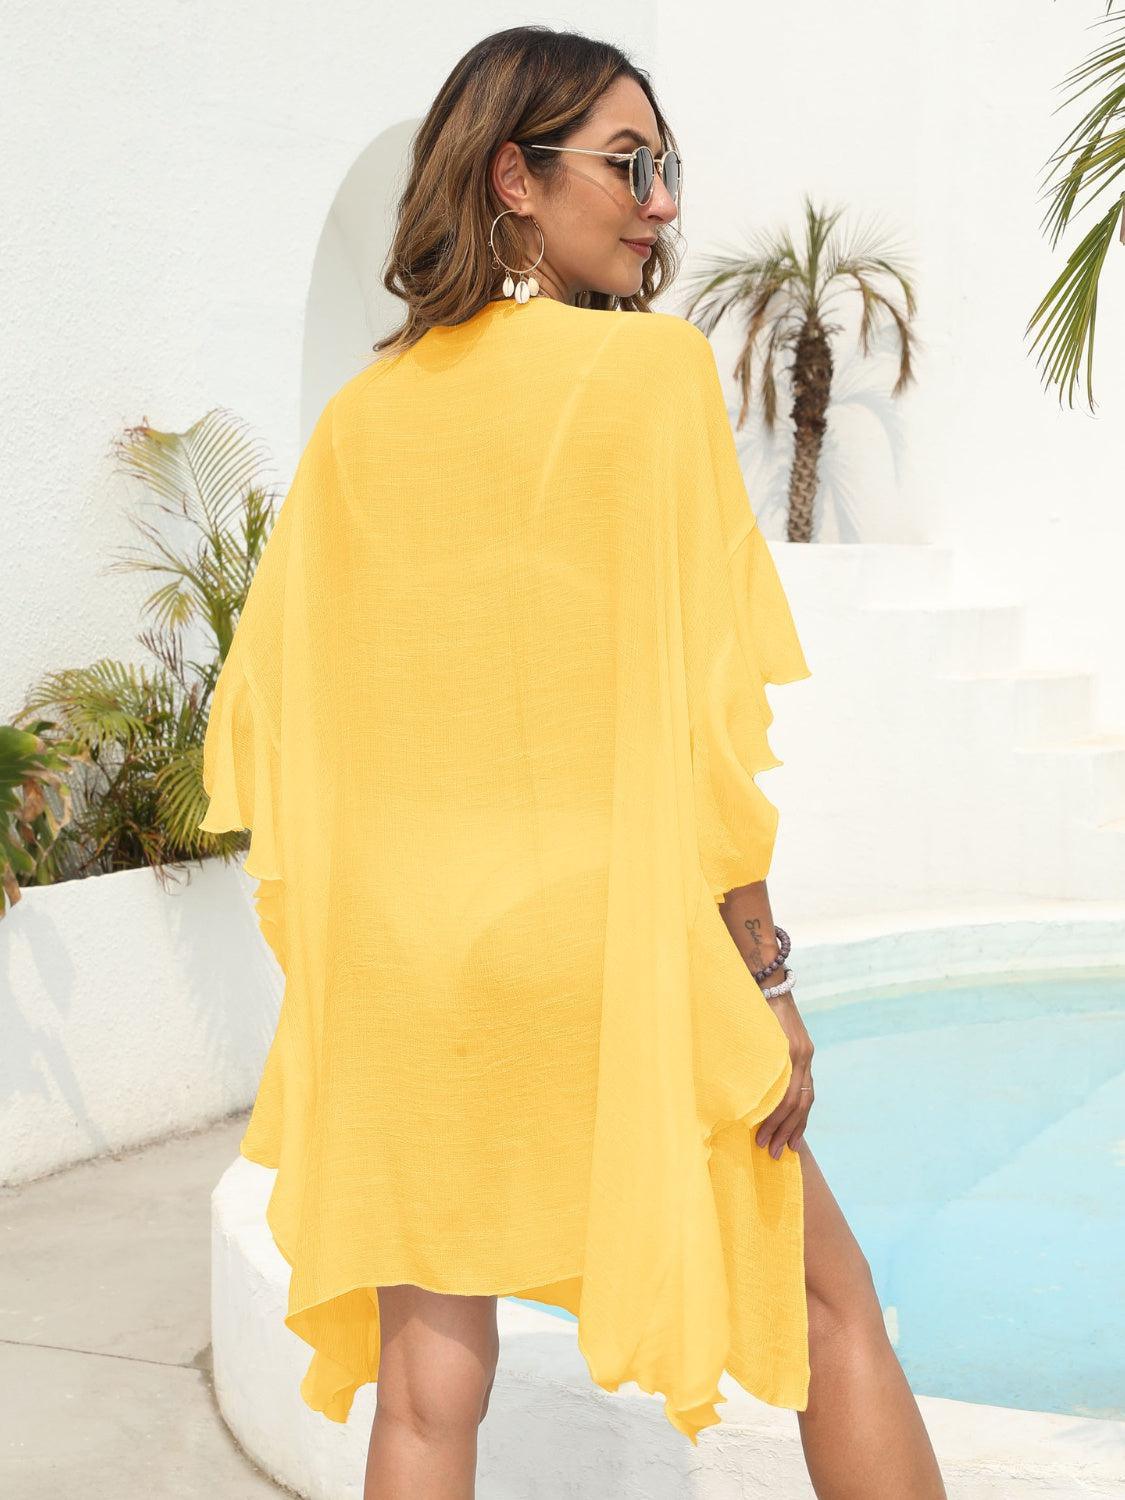 a woman in a yellow dress standing next to a pool